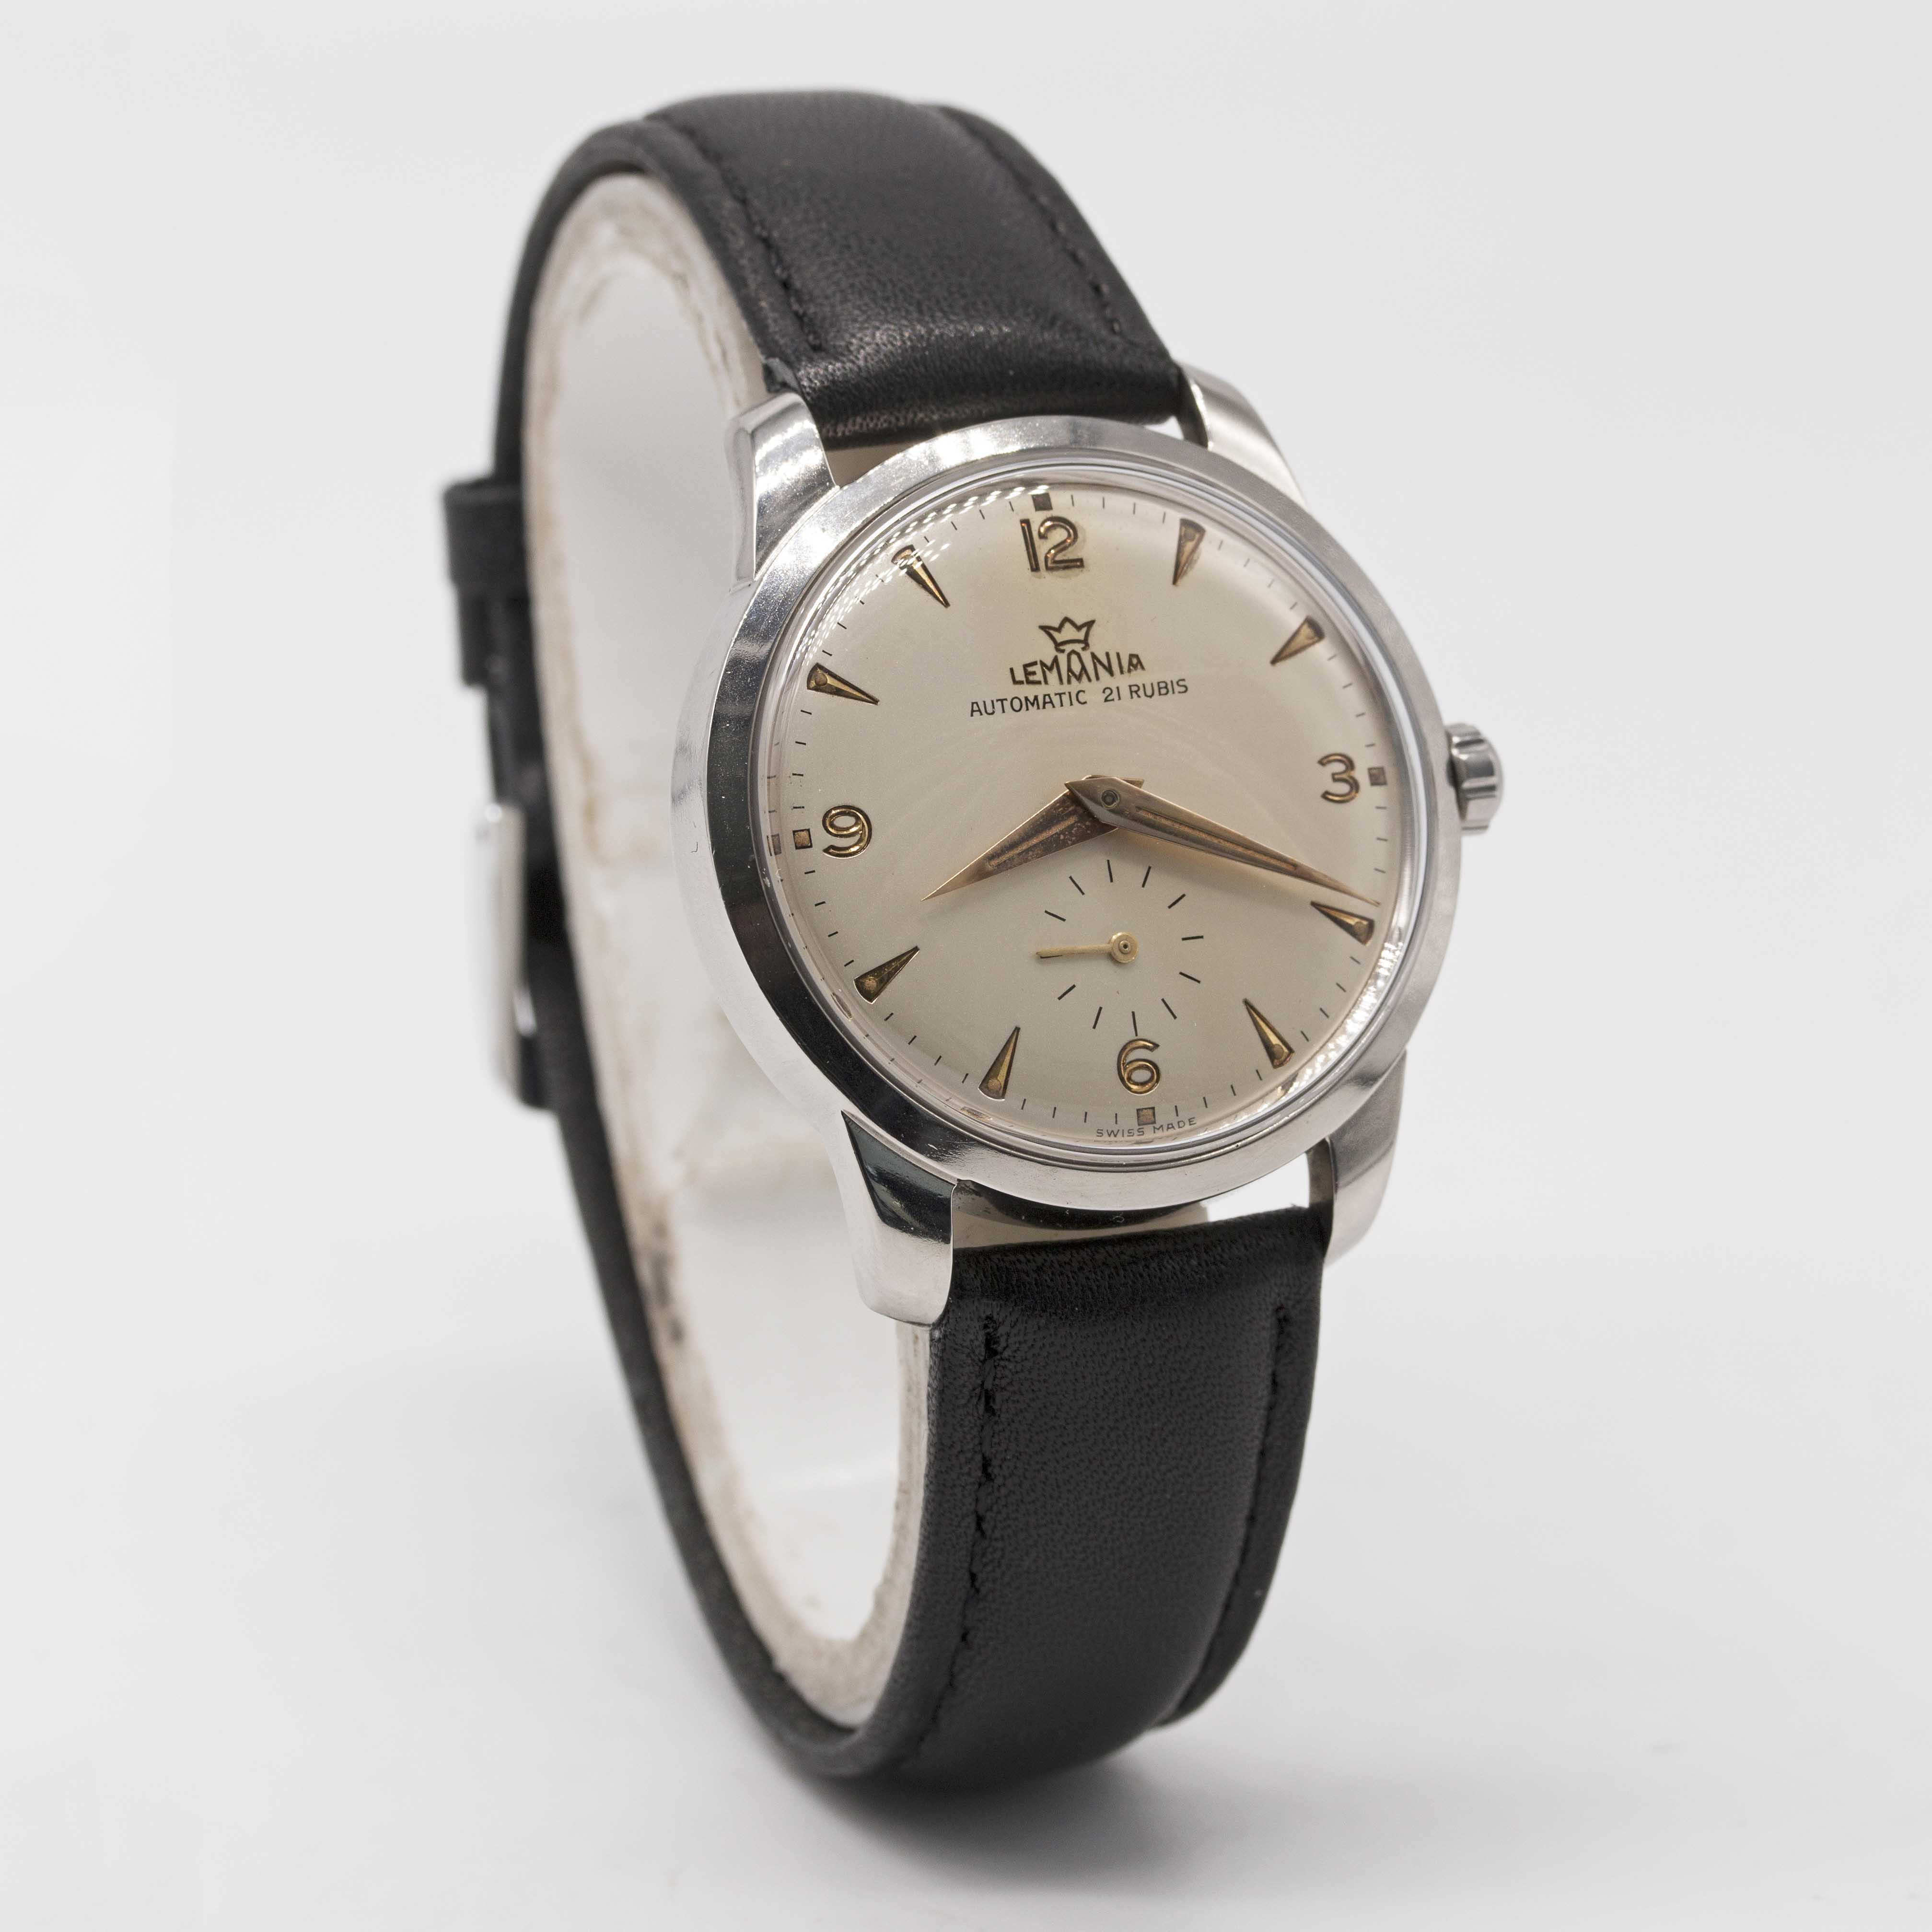 A GENTLEMAN'S STAINLESS STEEL LEMANIA AUTOMATIC WRIST WATCH CIRCA 1960s, REF. 288/3 SILVER DIAL WITH - Image 4 of 6